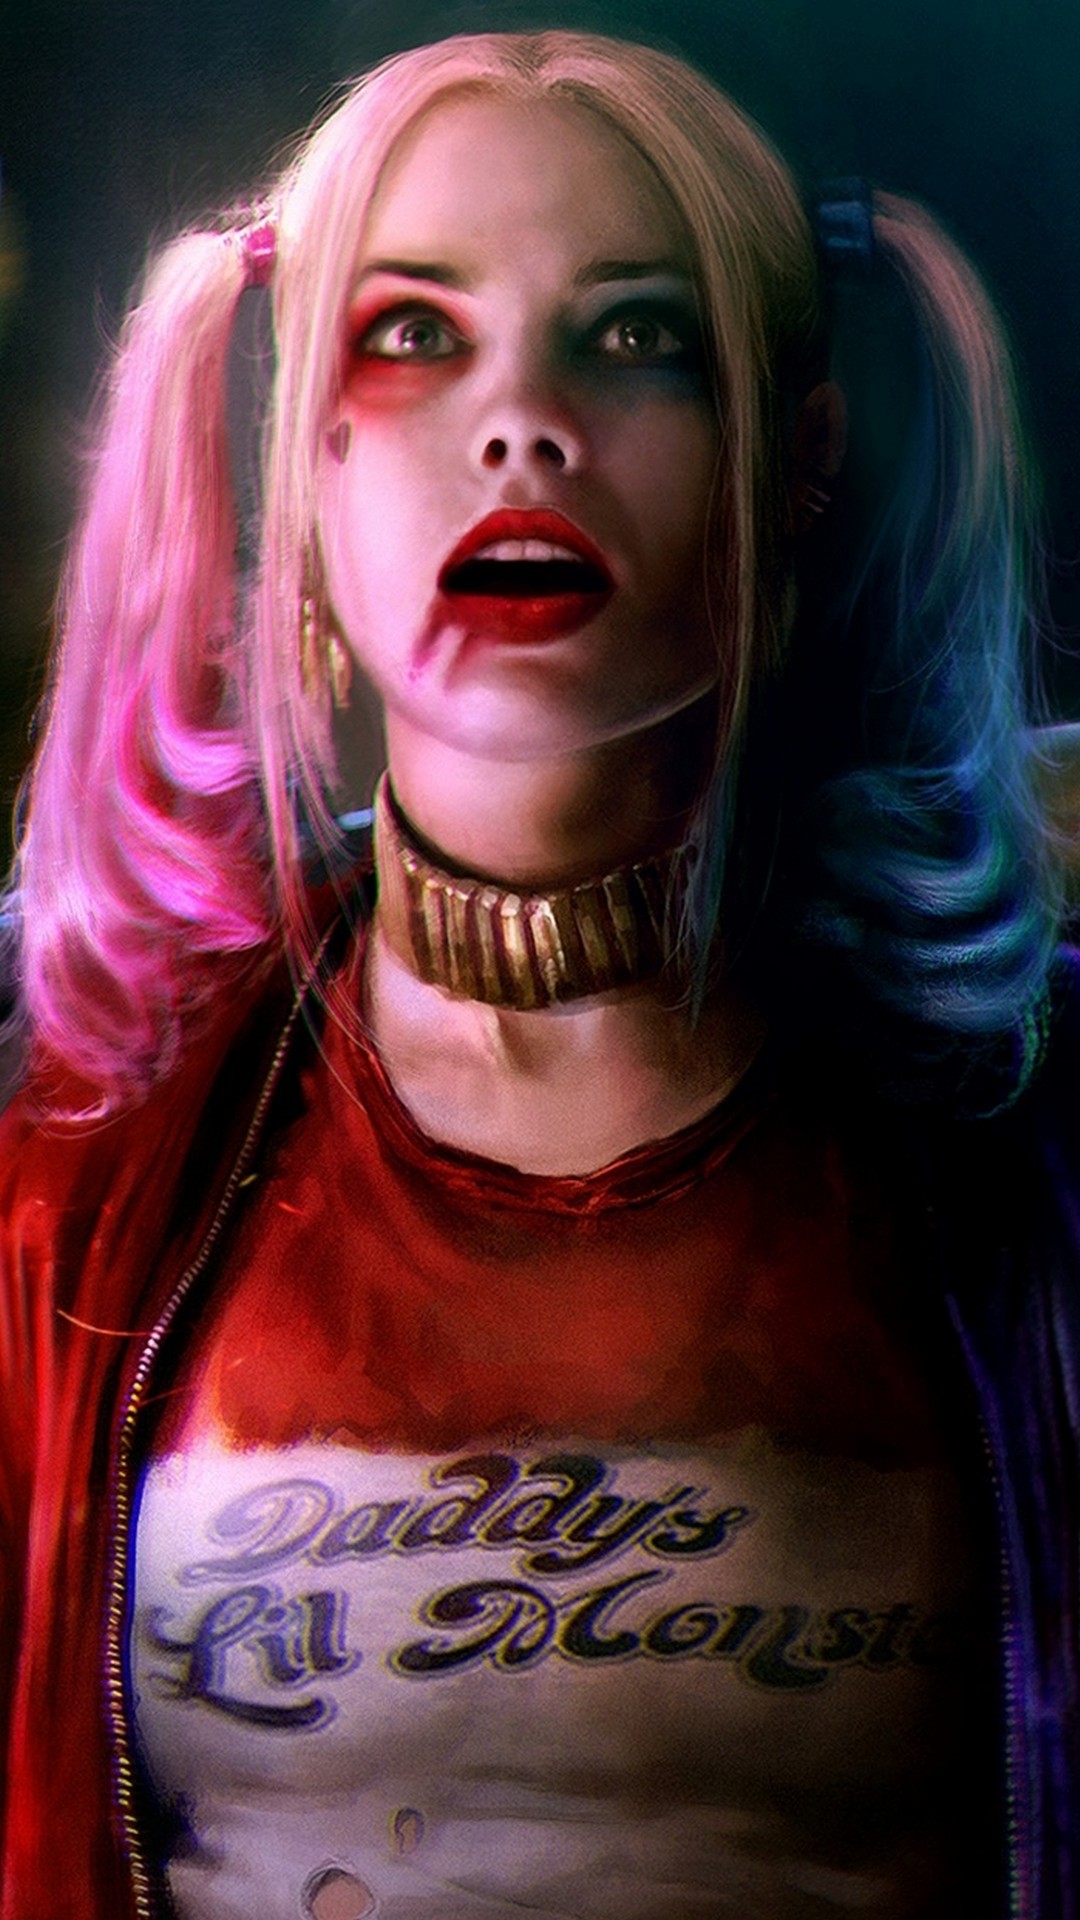 Wallpaper Harley Quinn Android with image resolution 1080x1920 pixel. You can make this wallpaper for your Android backgrounds, Tablet, Smartphones Screensavers and Mobile Phone Lock Screen